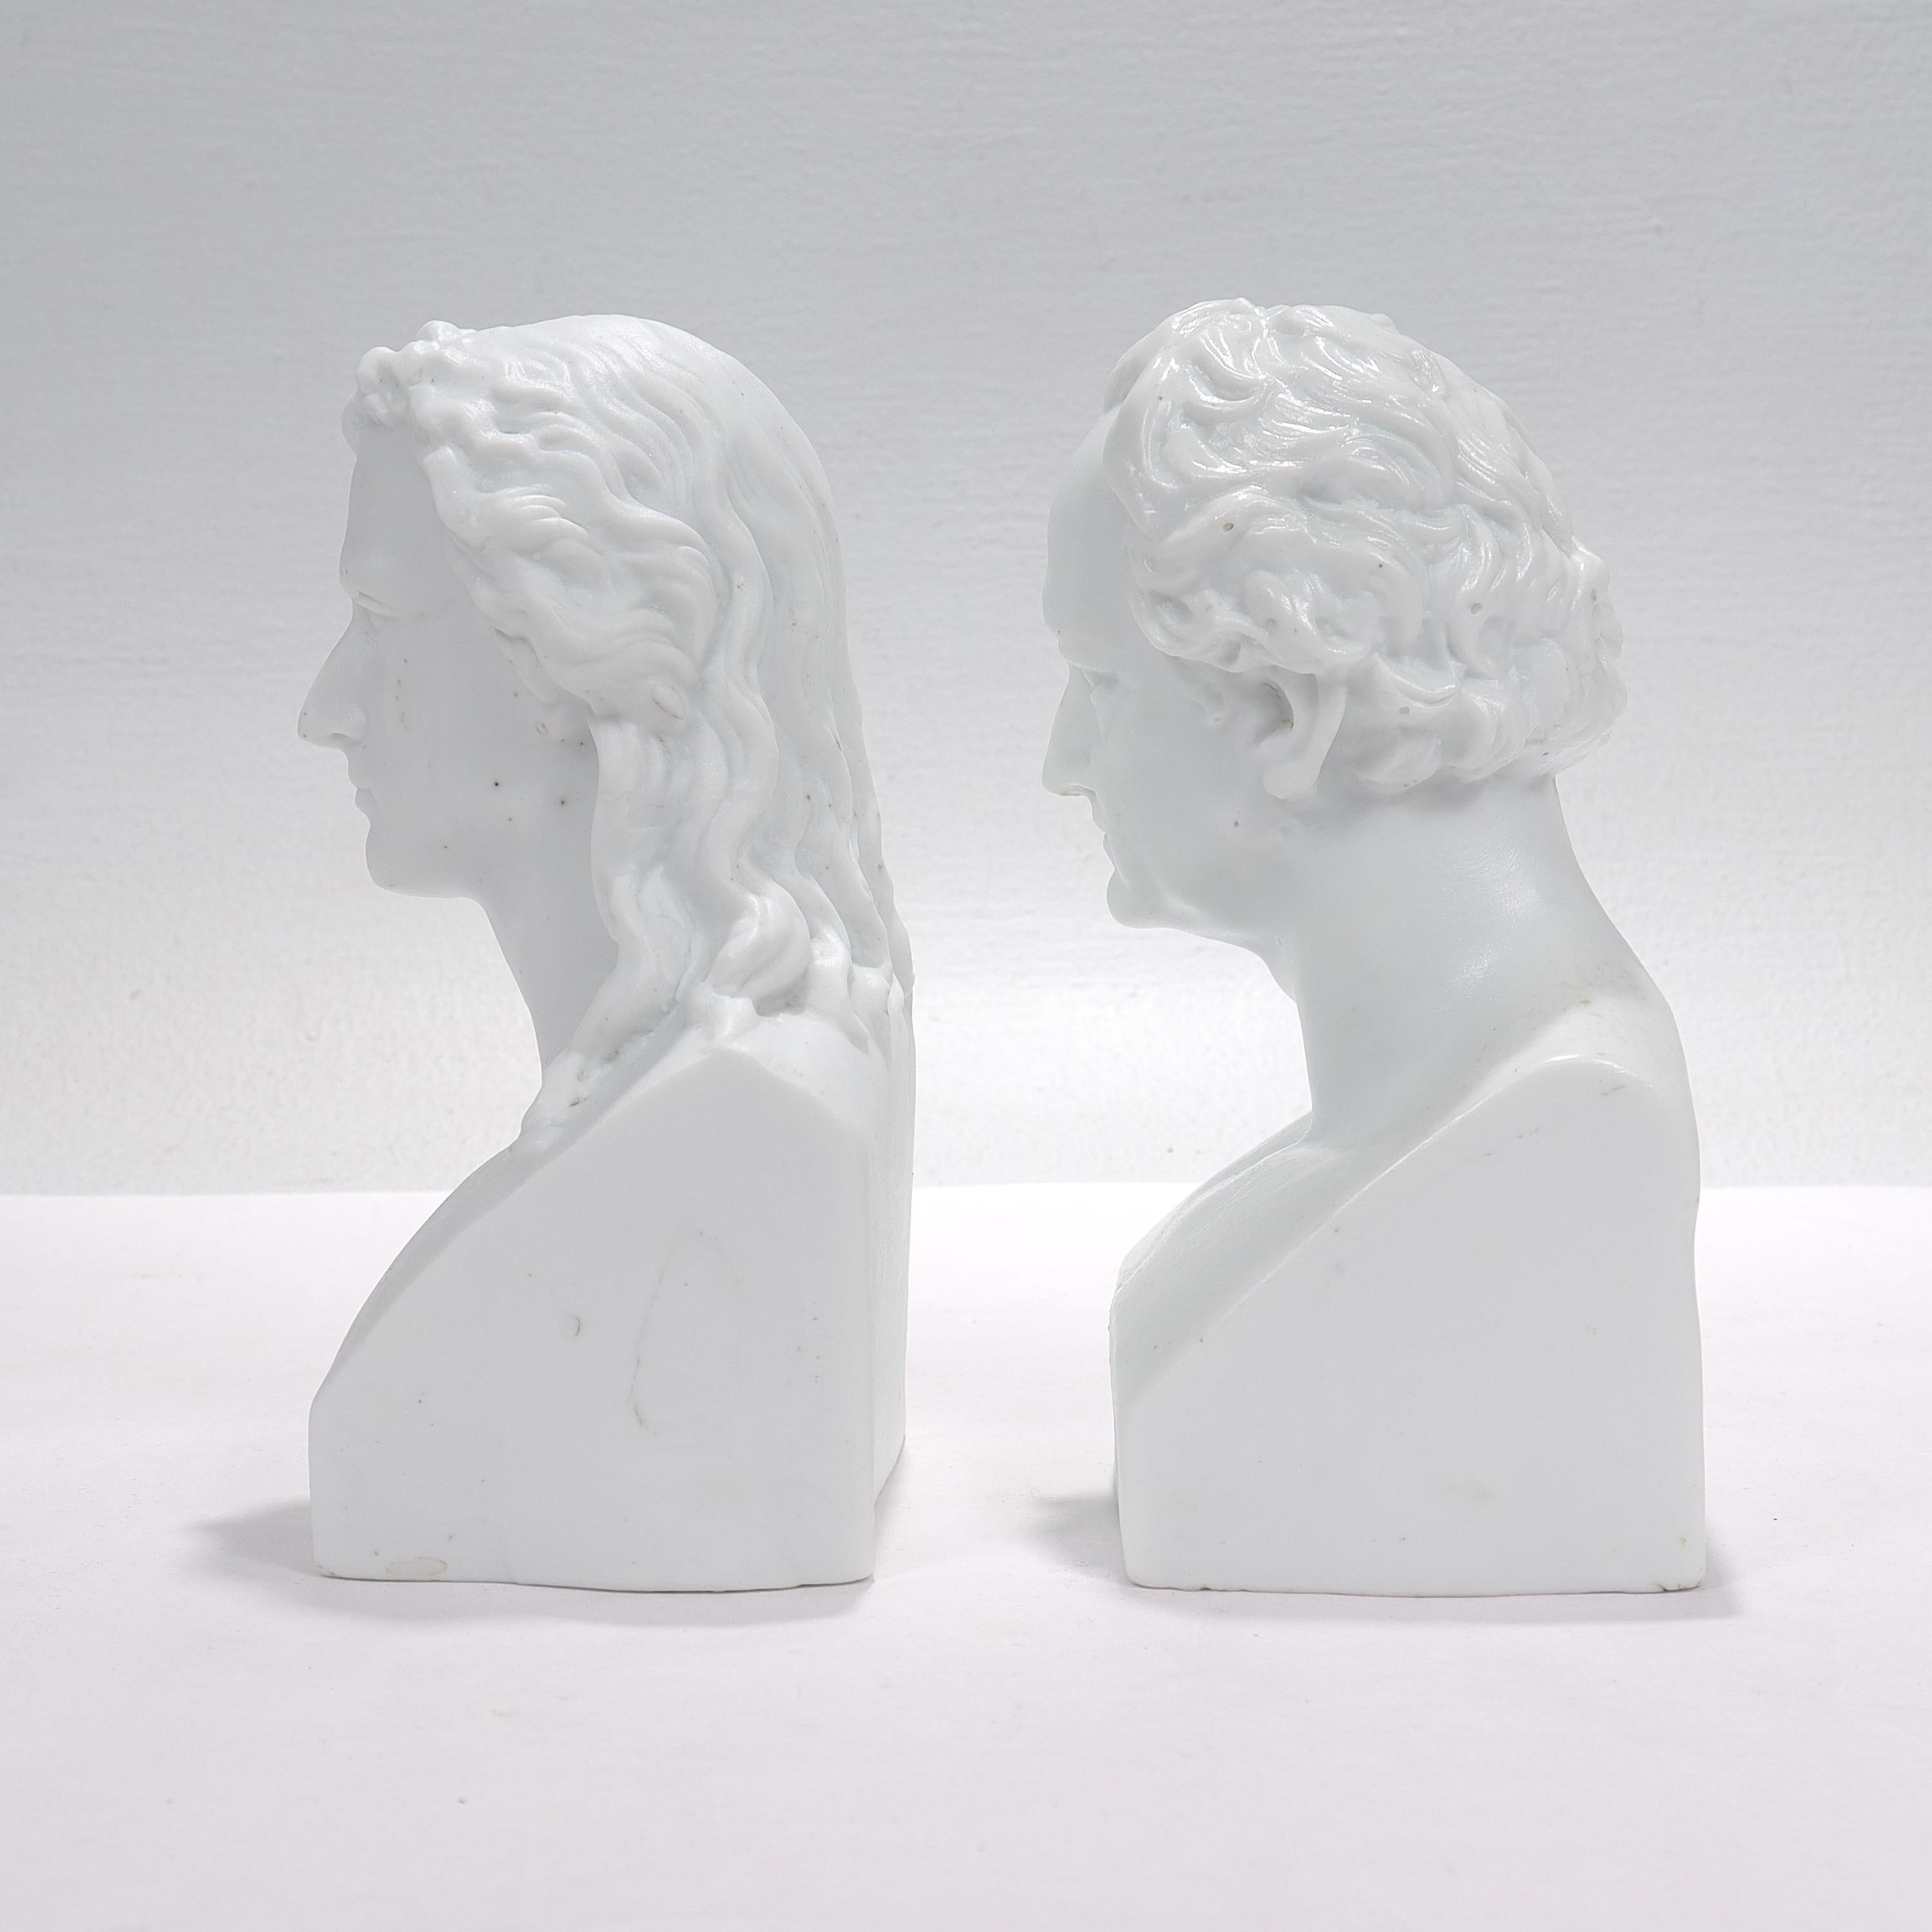 Antique Pair of Victorian Parian or Bisque Porcelain Busts of Schiller & Goethe  In Fair Condition For Sale In Philadelphia, PA